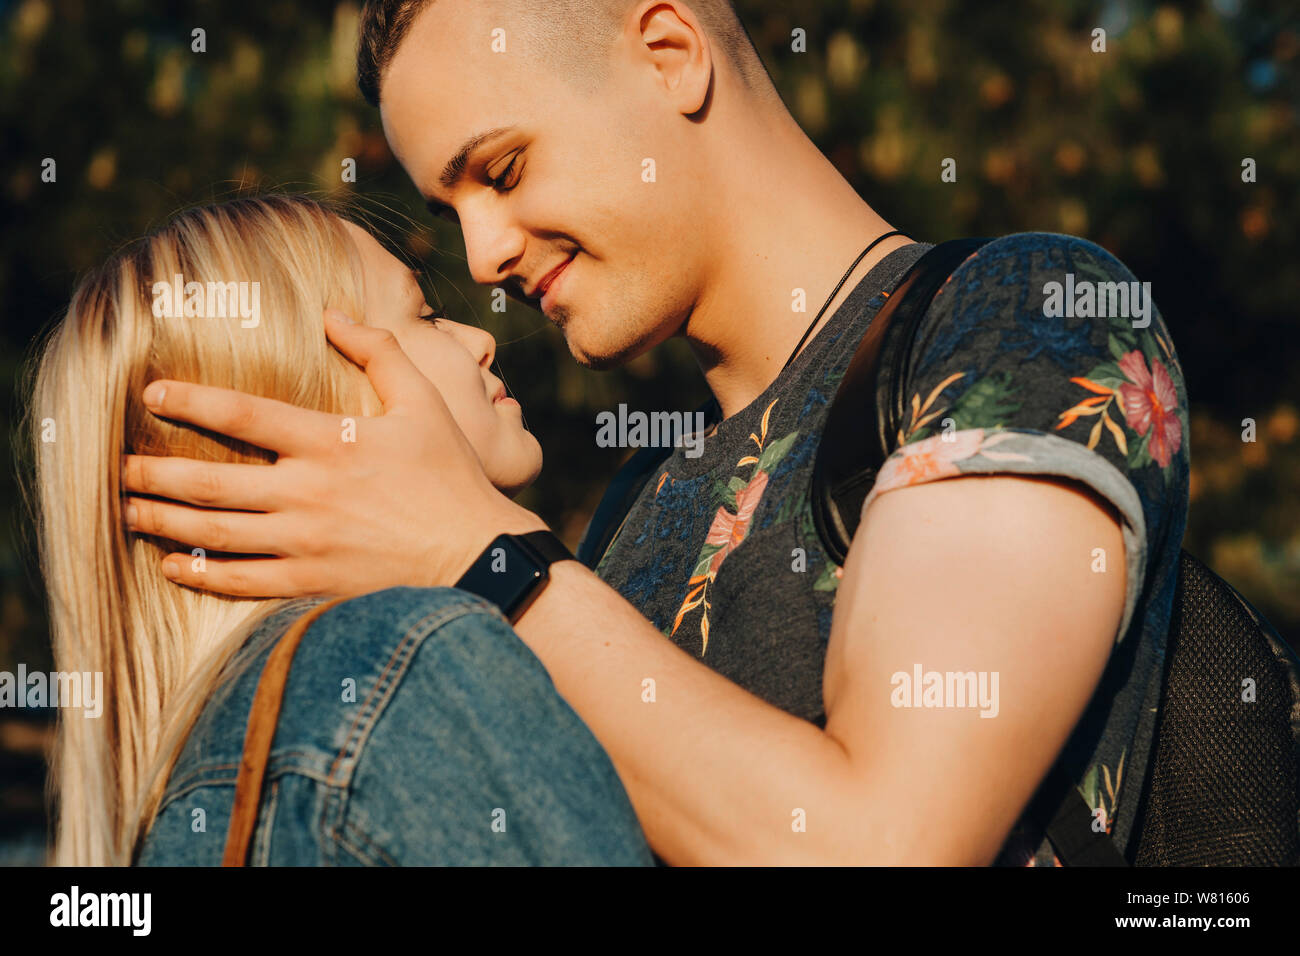 https://c8.alamy.com/comp/W81606/beautiful-young-men-holding-his-amazing-girlfriends-face-close-looking-at-her-with-love-smiling-while-she-is-looking-at-him-while-traveling-around-the-W81606.jpg